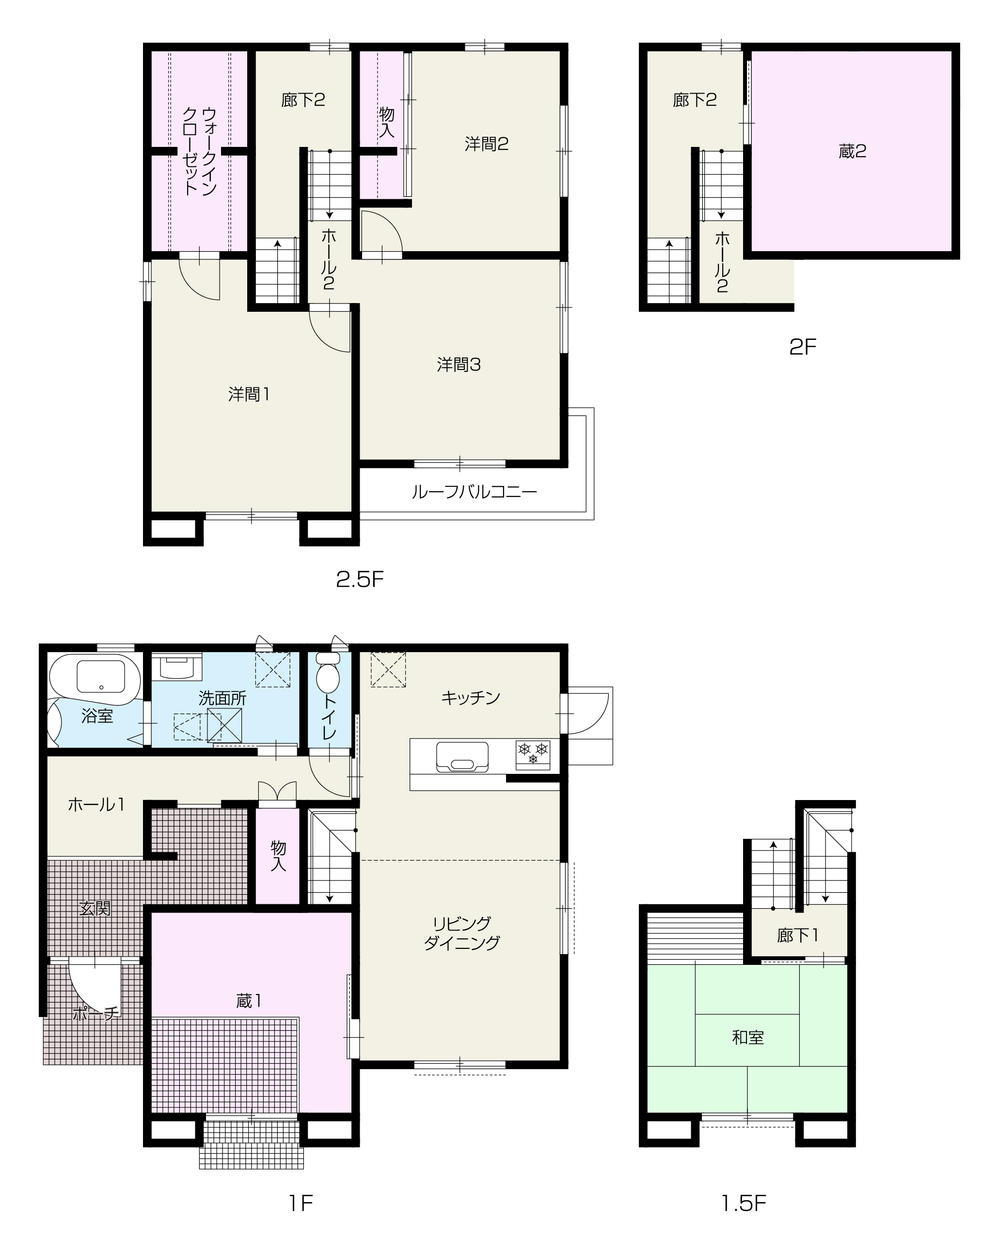 Floor plan. 26,300,000 yen, 4LDK, Land area 182.98 sq m , There is a warehouse on the first floor and the second floor building area 122.55 sq m.